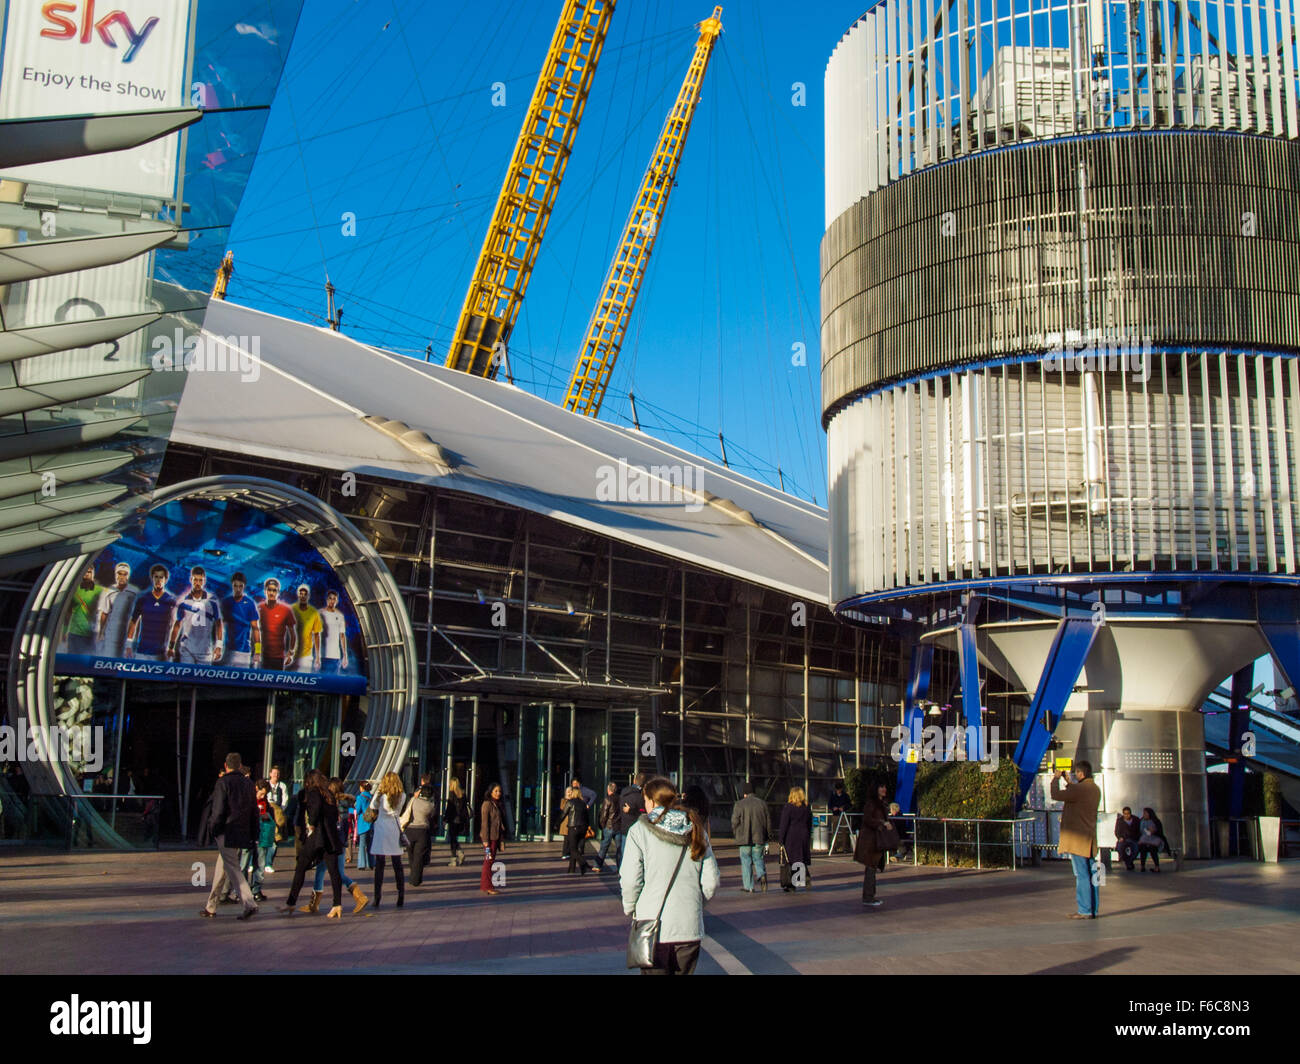 Entrance to the O2 Arena when it staged the 2011 ATP World Tour Finals ...